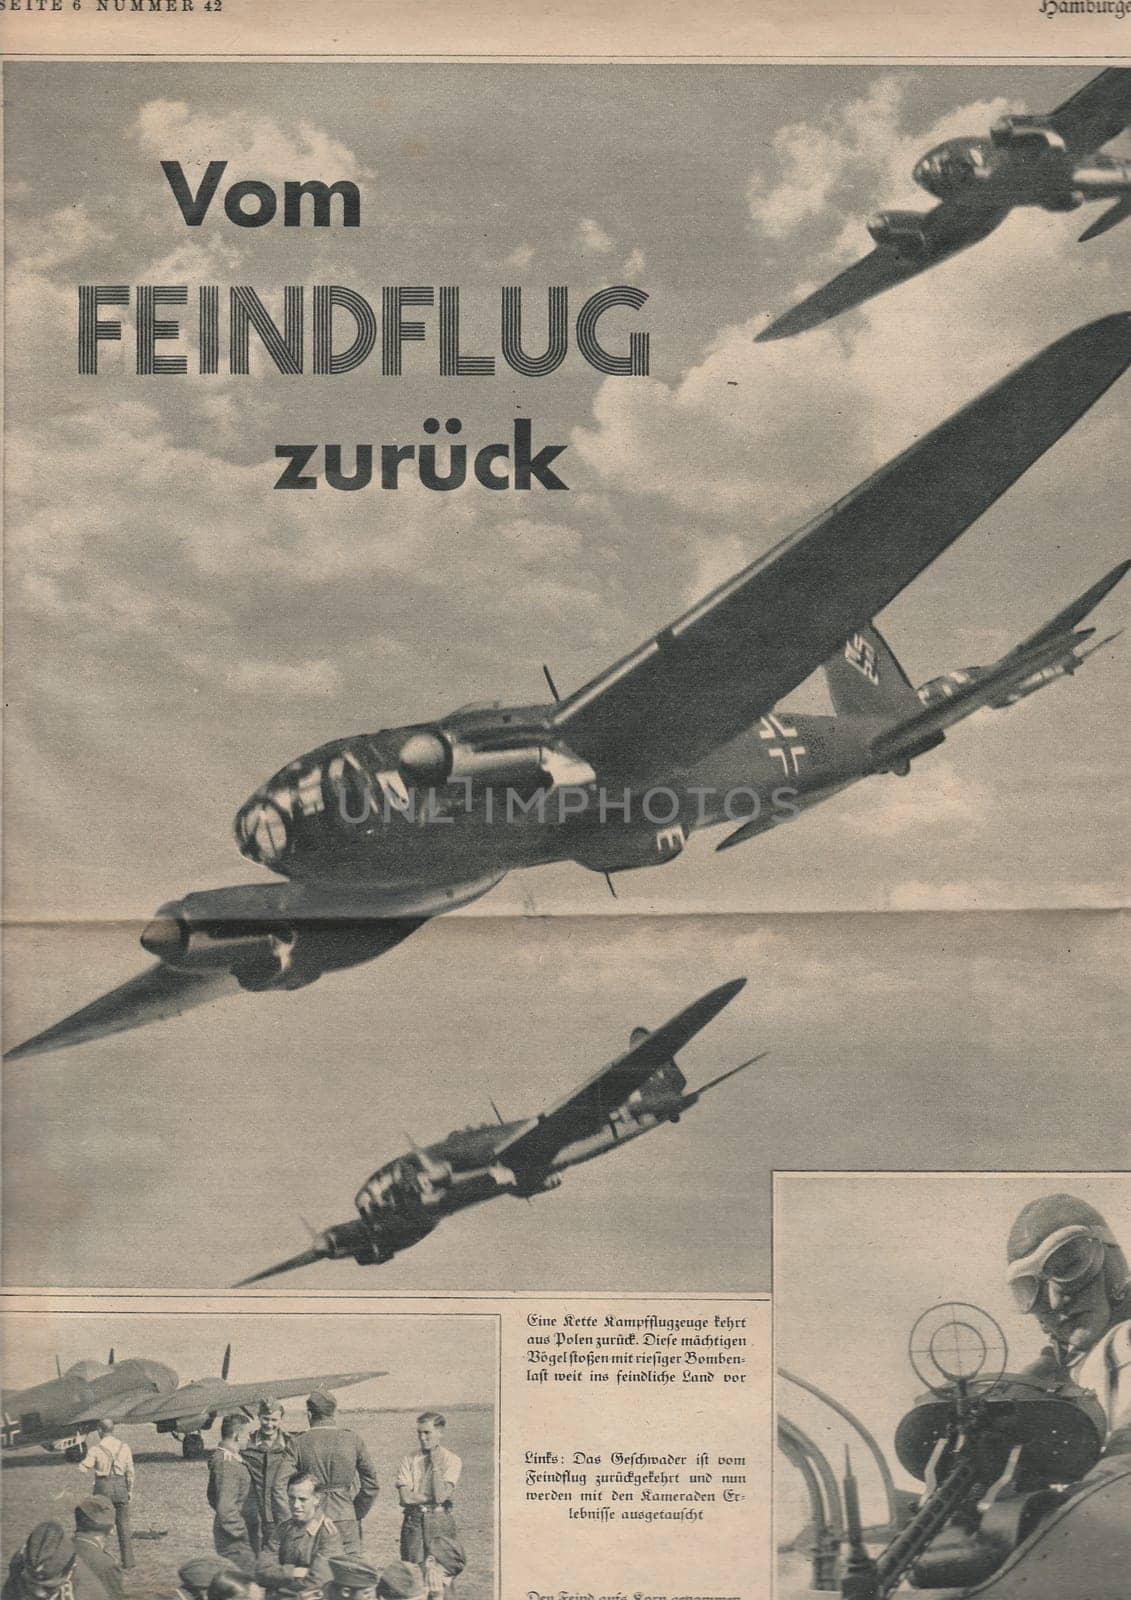 HAMBURG, GERMANY - 1939: Reproduction of magazine page shows pictures from Nazi Germany. Pilots and airplanes of Luftwaffe.